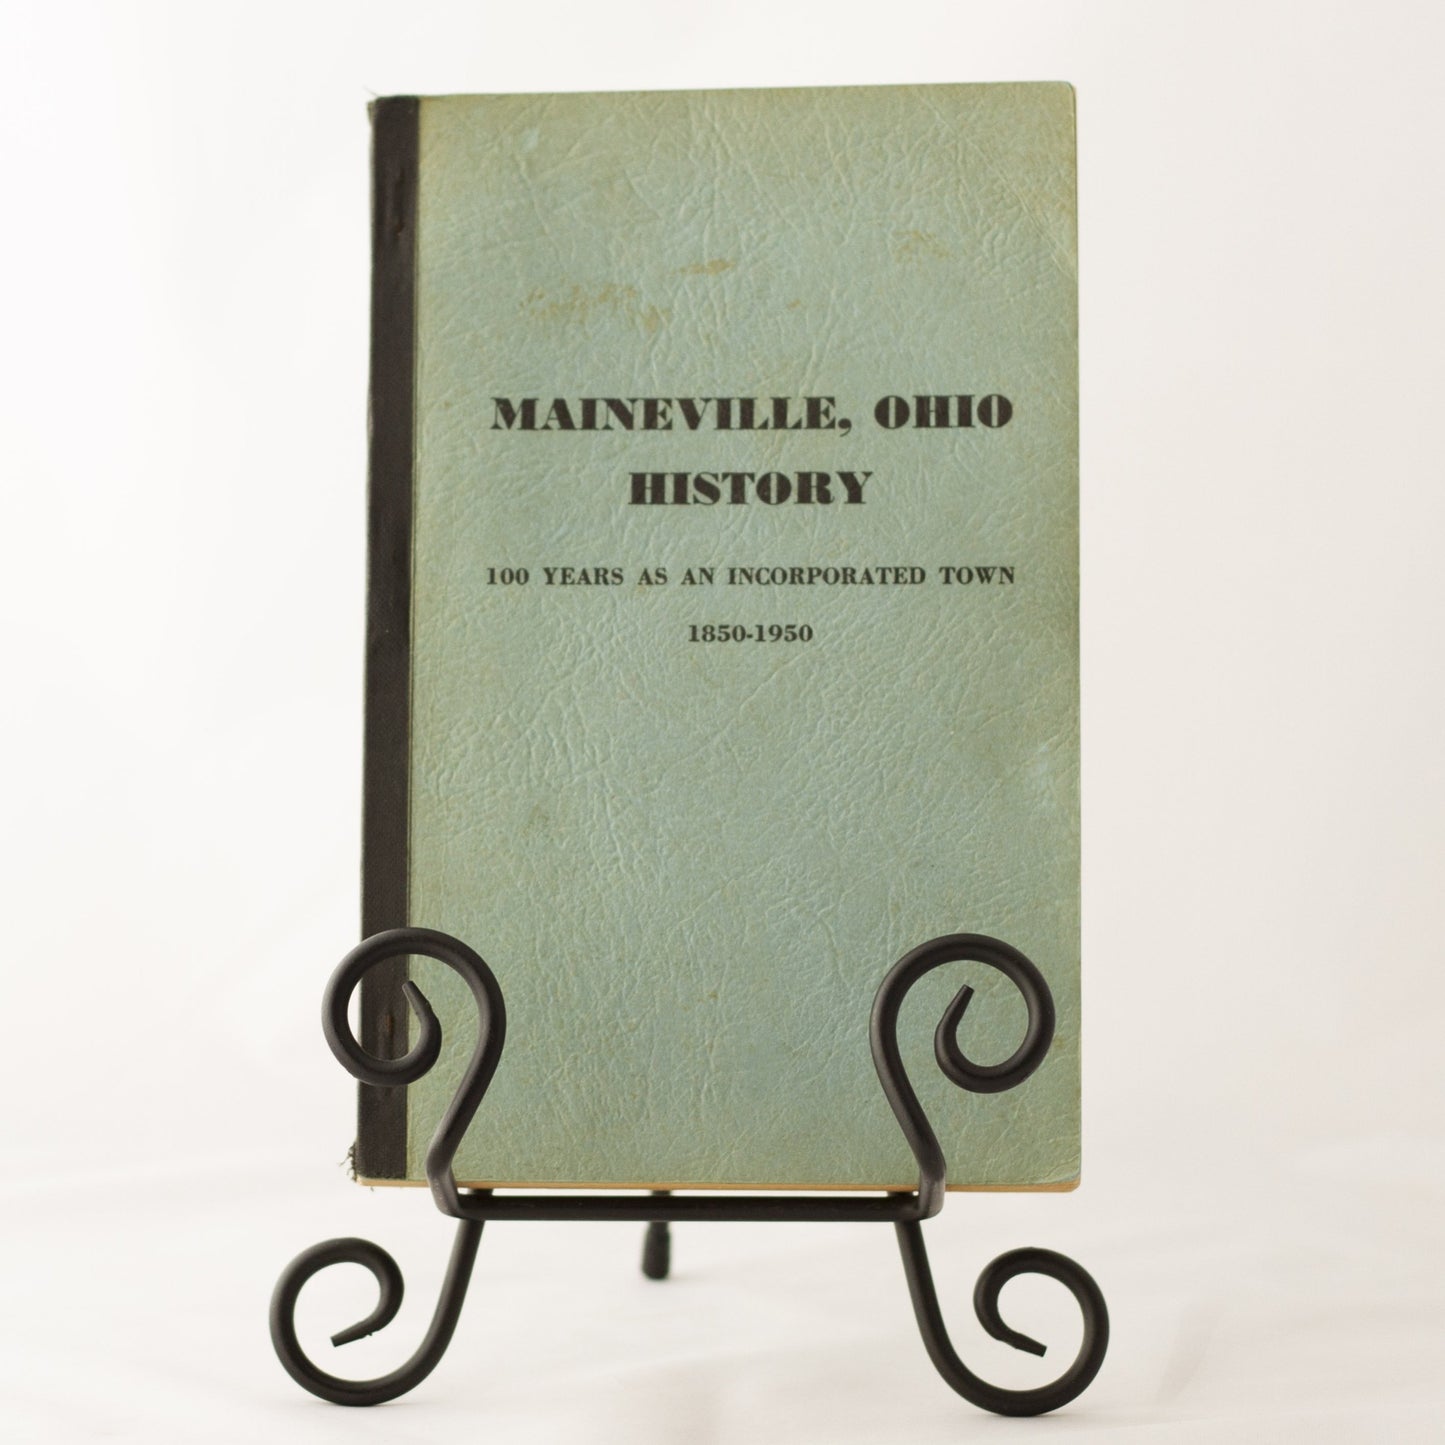 MAINEVILLE OHIO HISTORY 100 Years as Incorporated Town 1850 - 1950 by Robert Brenner